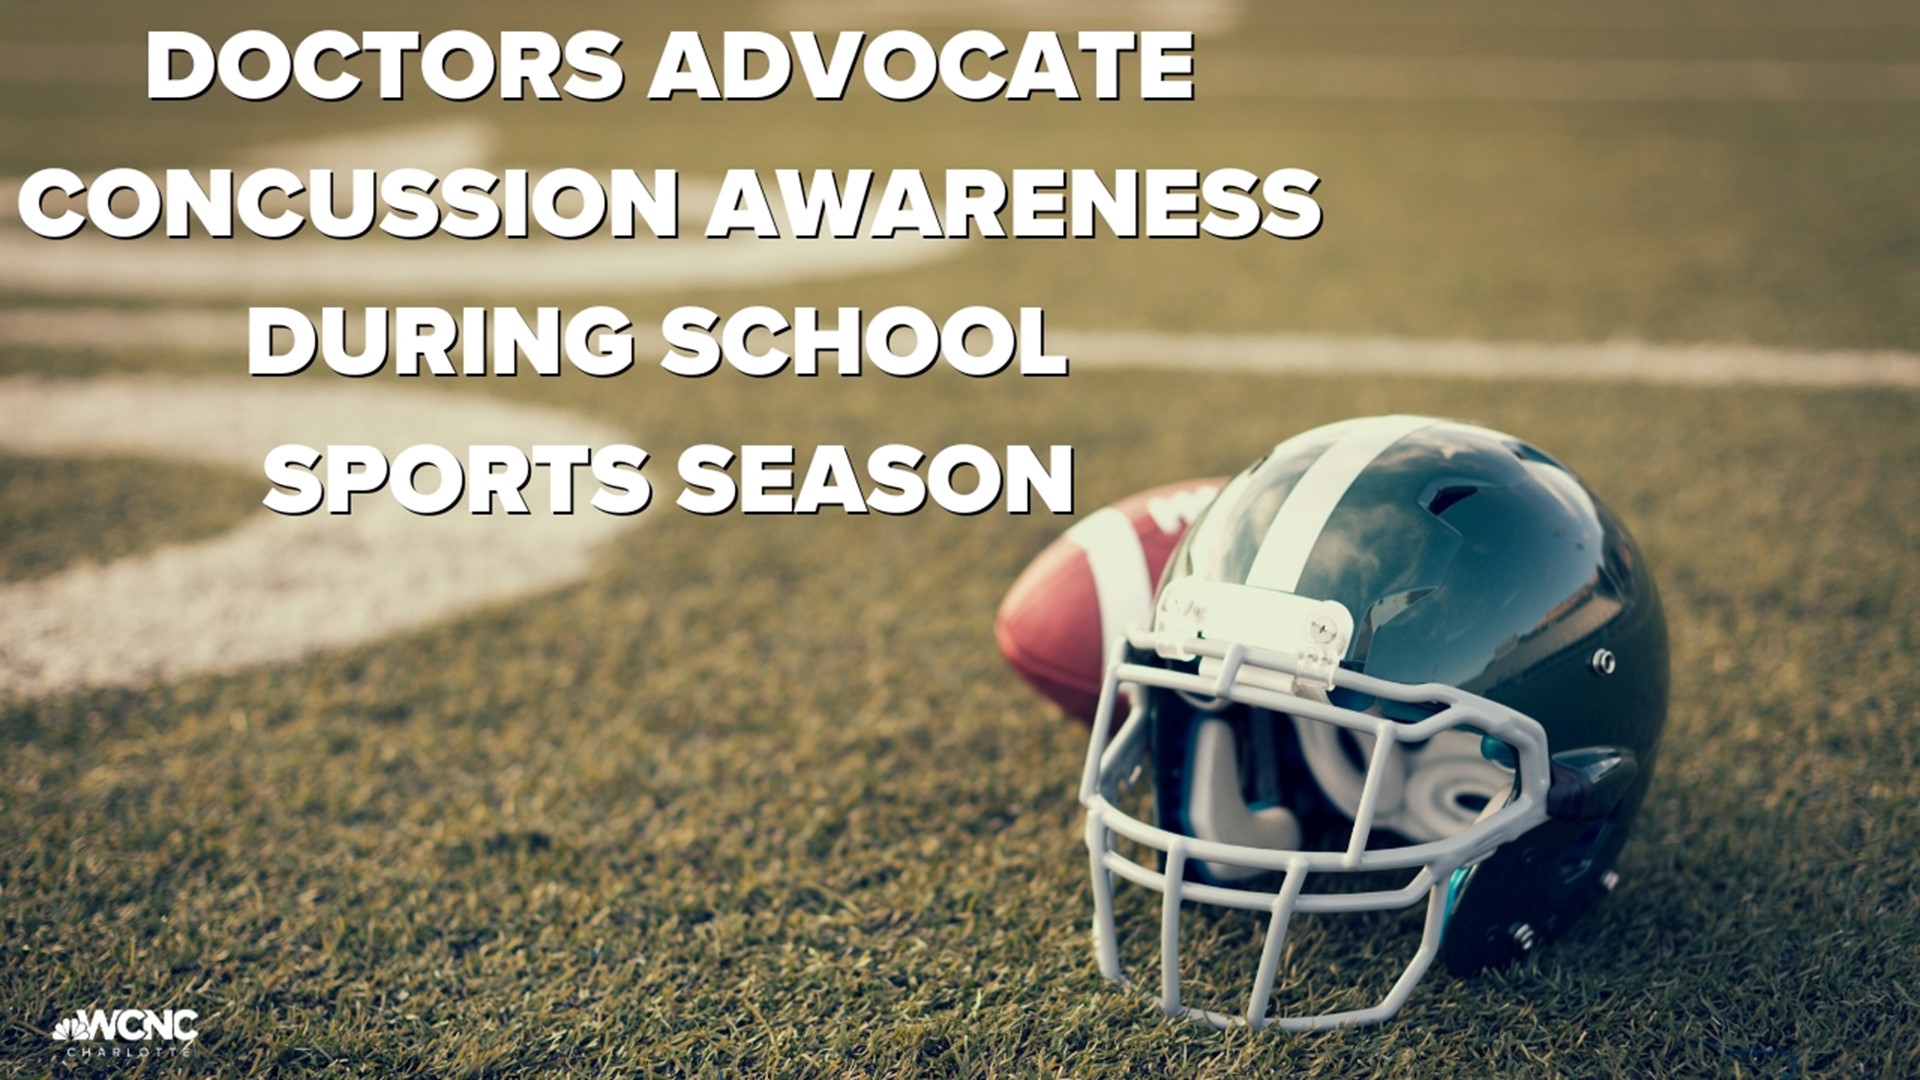 Doctors advocate concussion awareness during school sports season